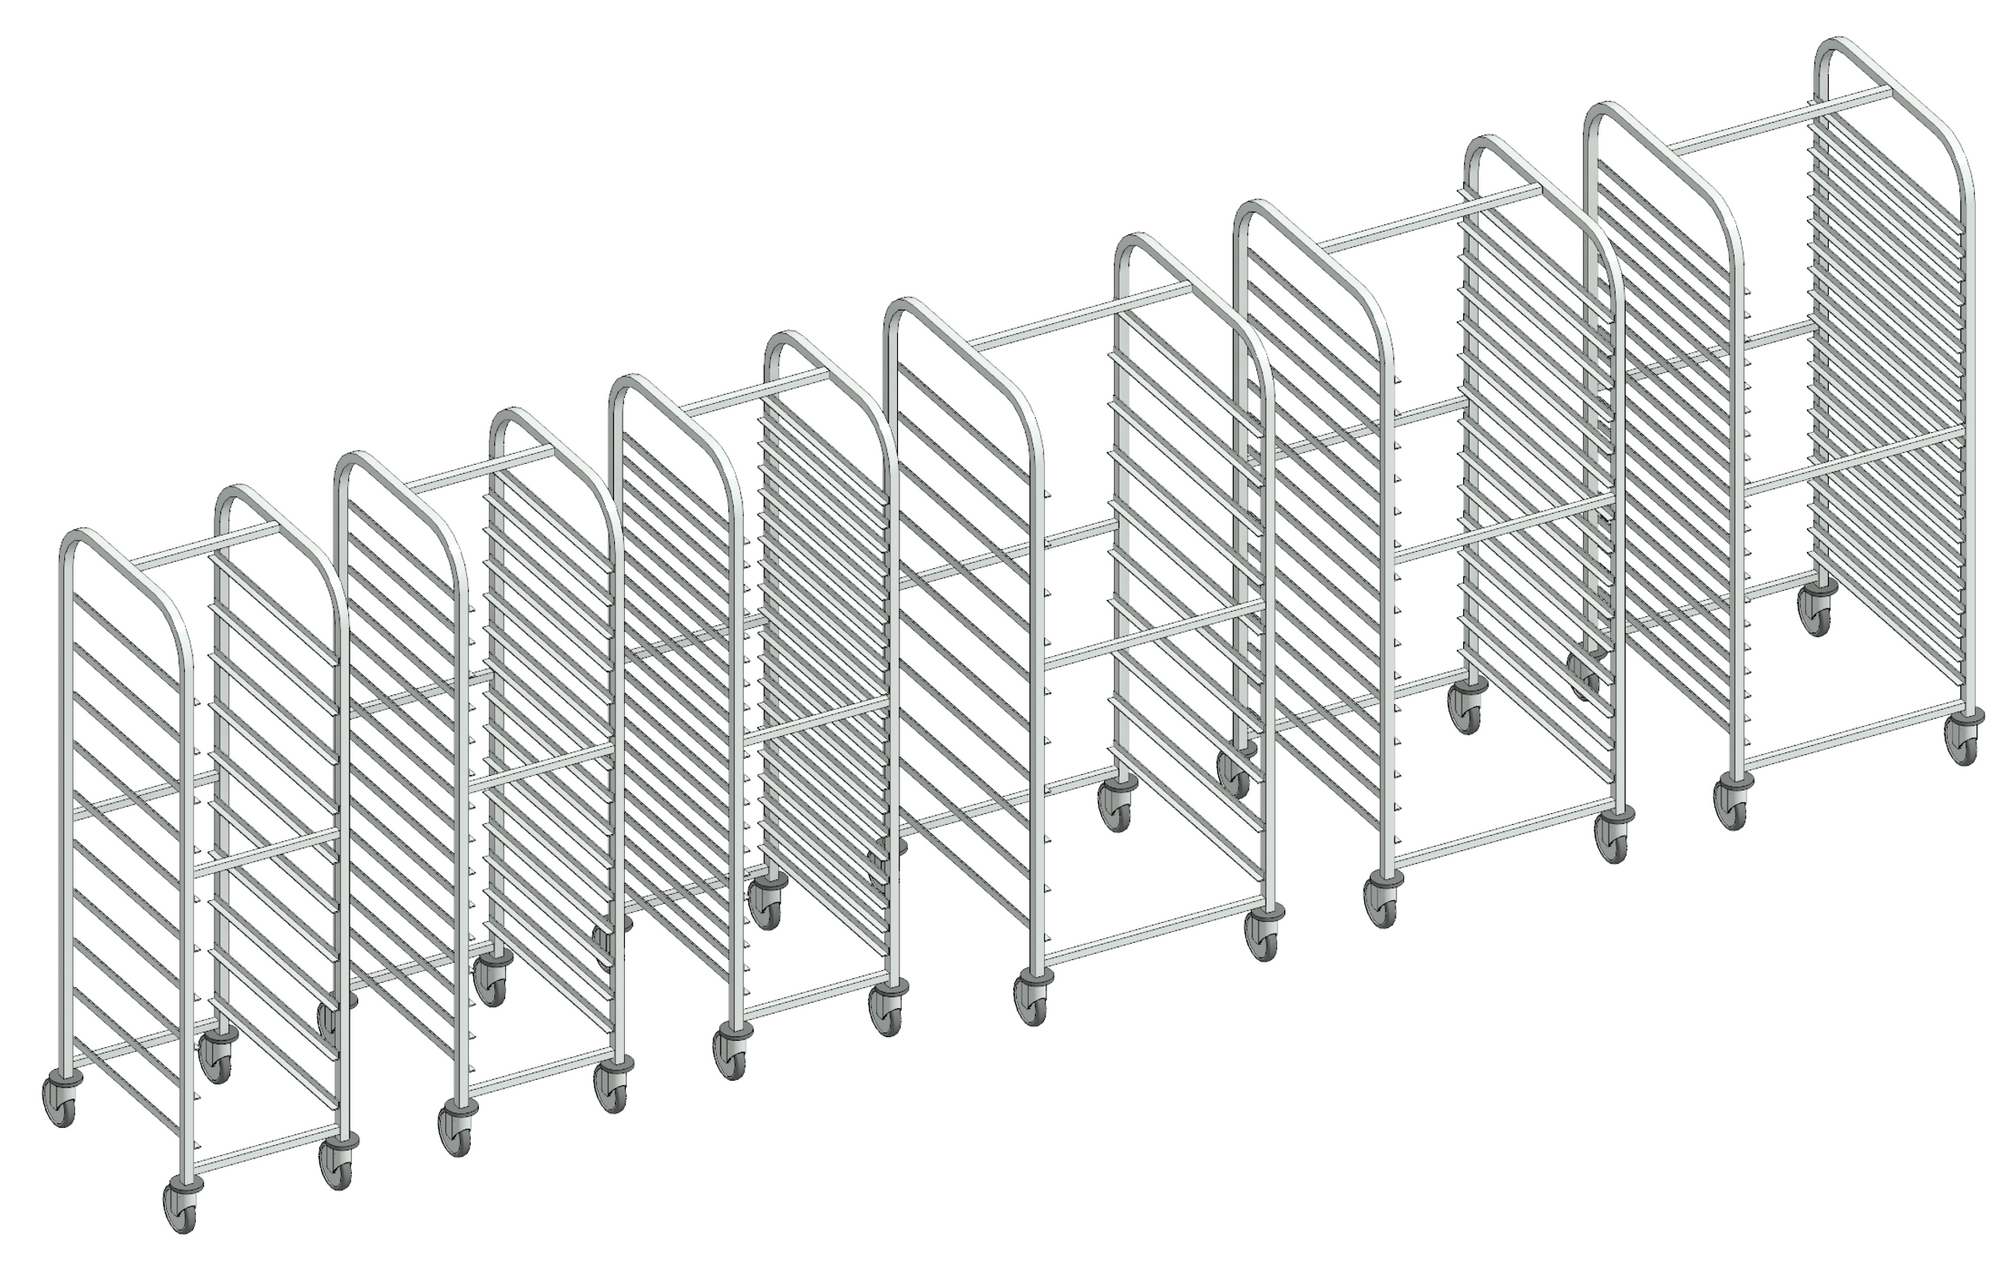 Revit family of mobile tray storage racks from Merlin Industrial Products.